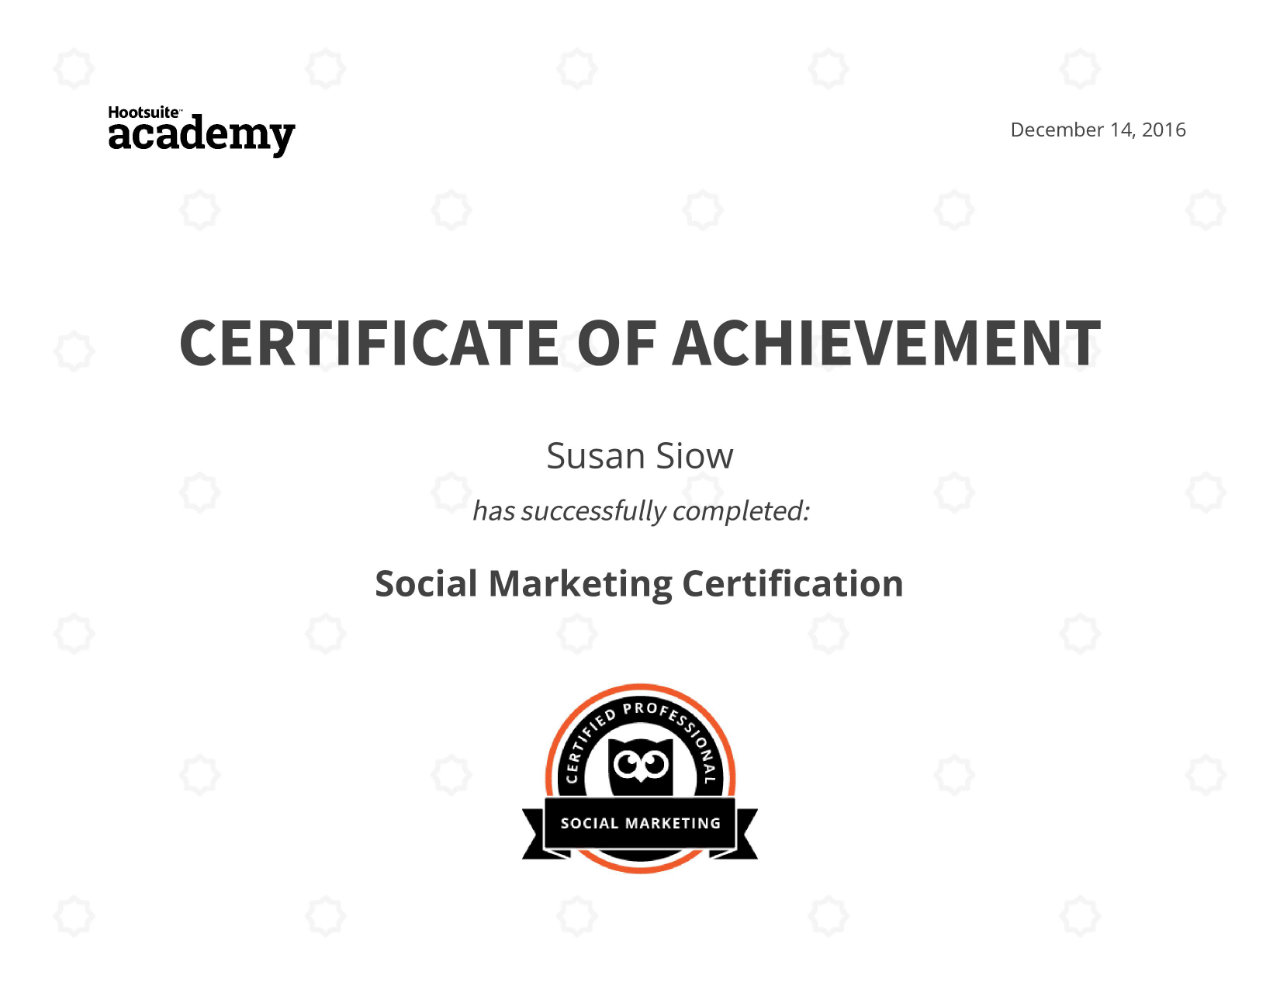 Hootsuite Academy | Social Marketing Certification